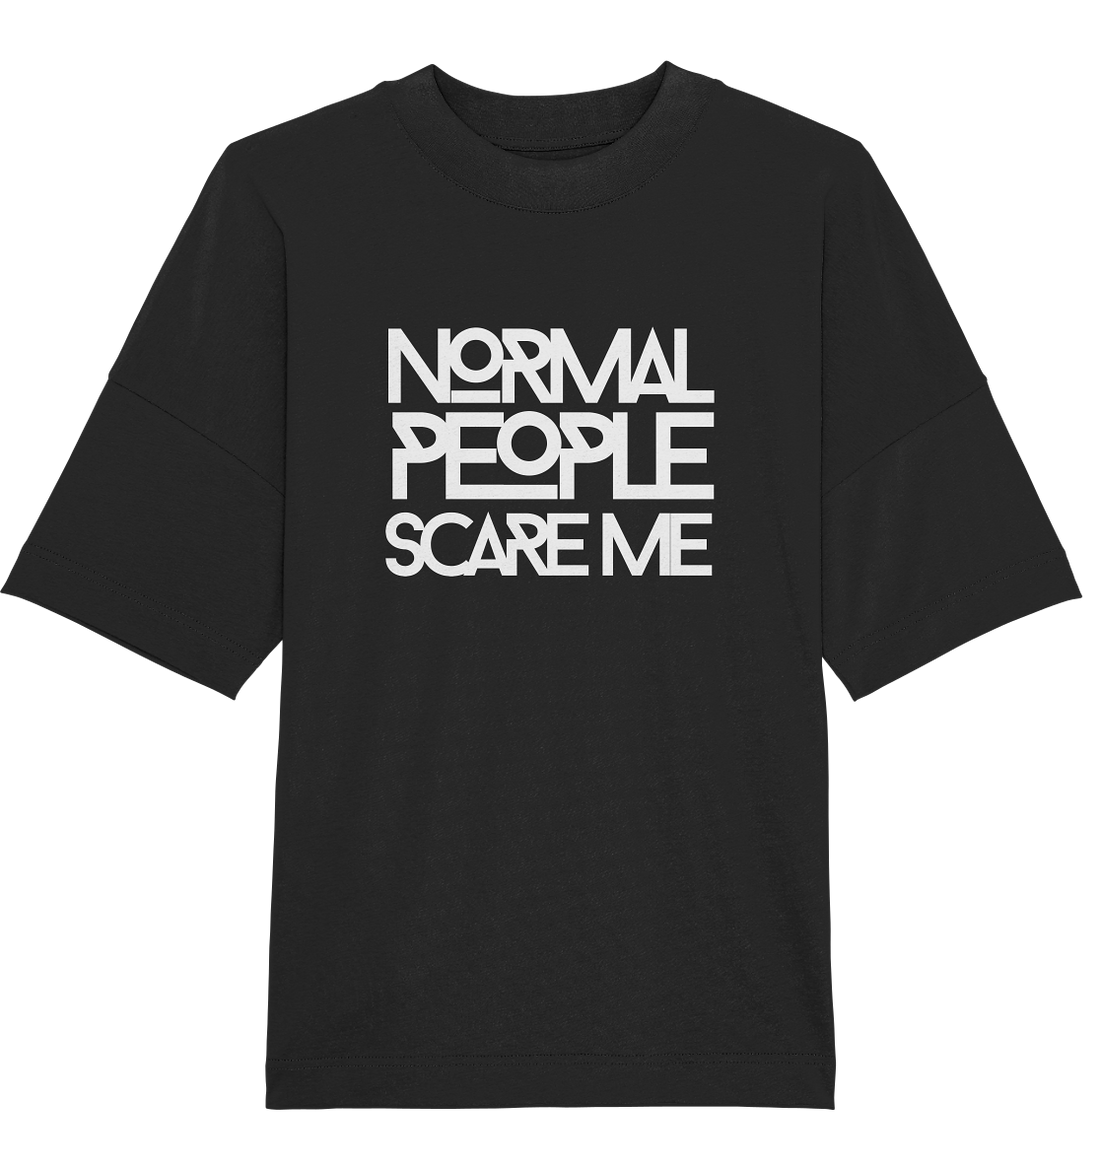 Normal people scare me - Oversized Unisex T-Shirt